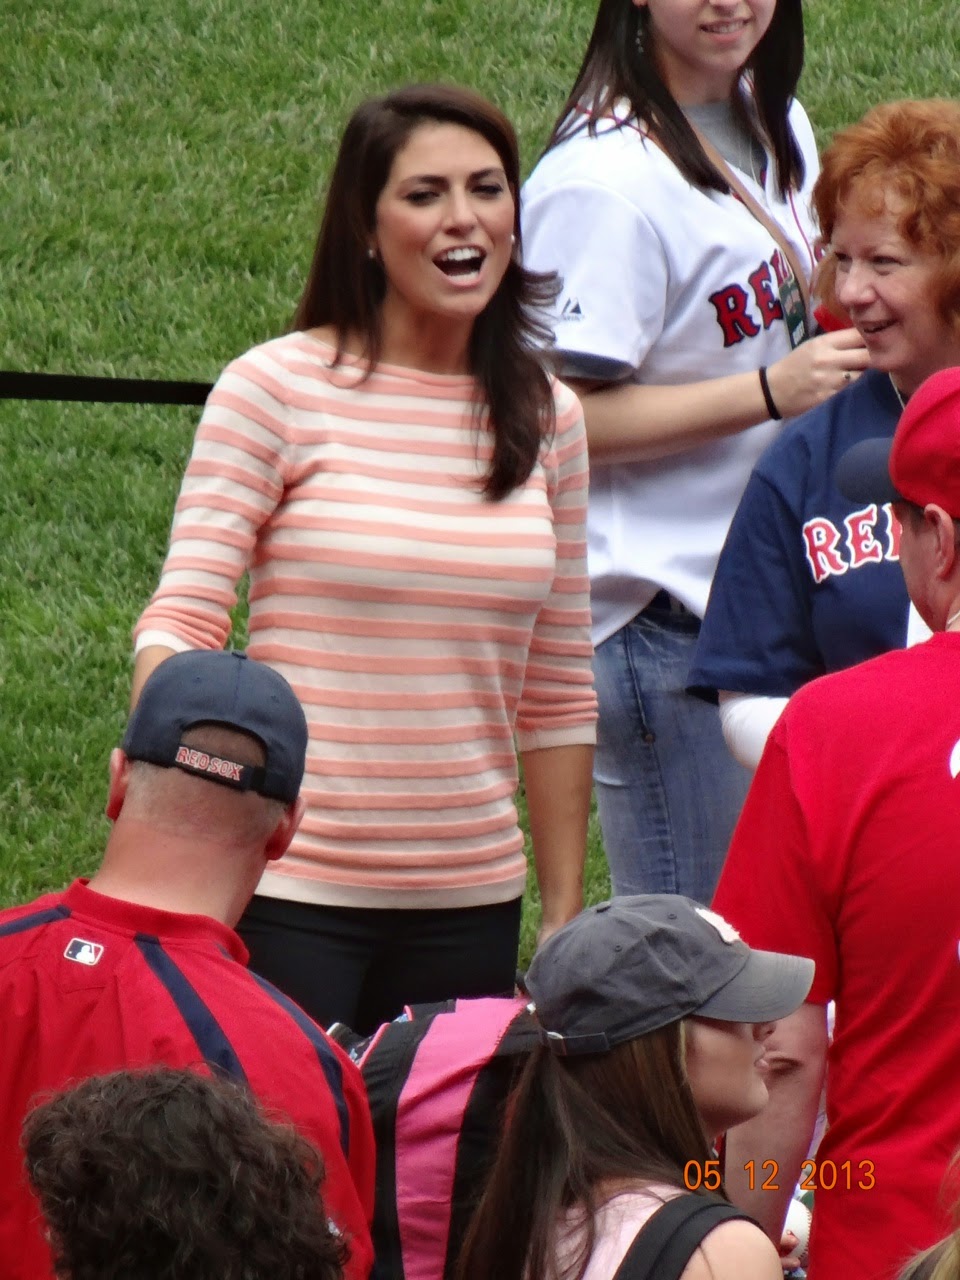 A Look At Absolutely Gorgeous Sports Reporter Jenny Dell Part 2.